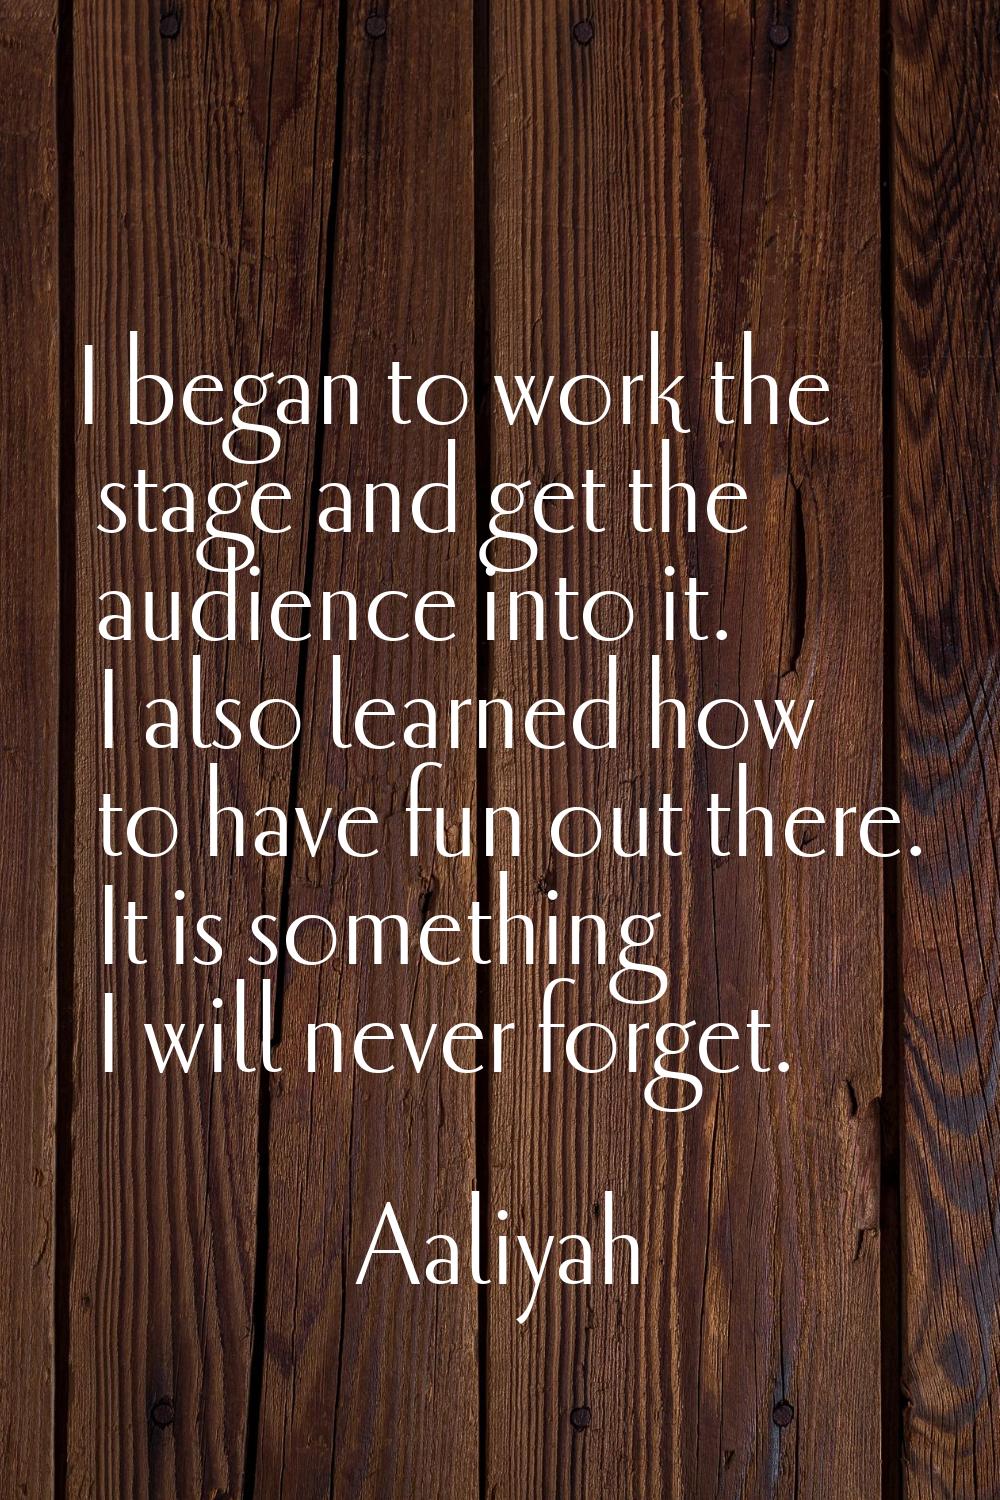 I began to work the stage and get the audience into it. I also learned how to have fun out there. I